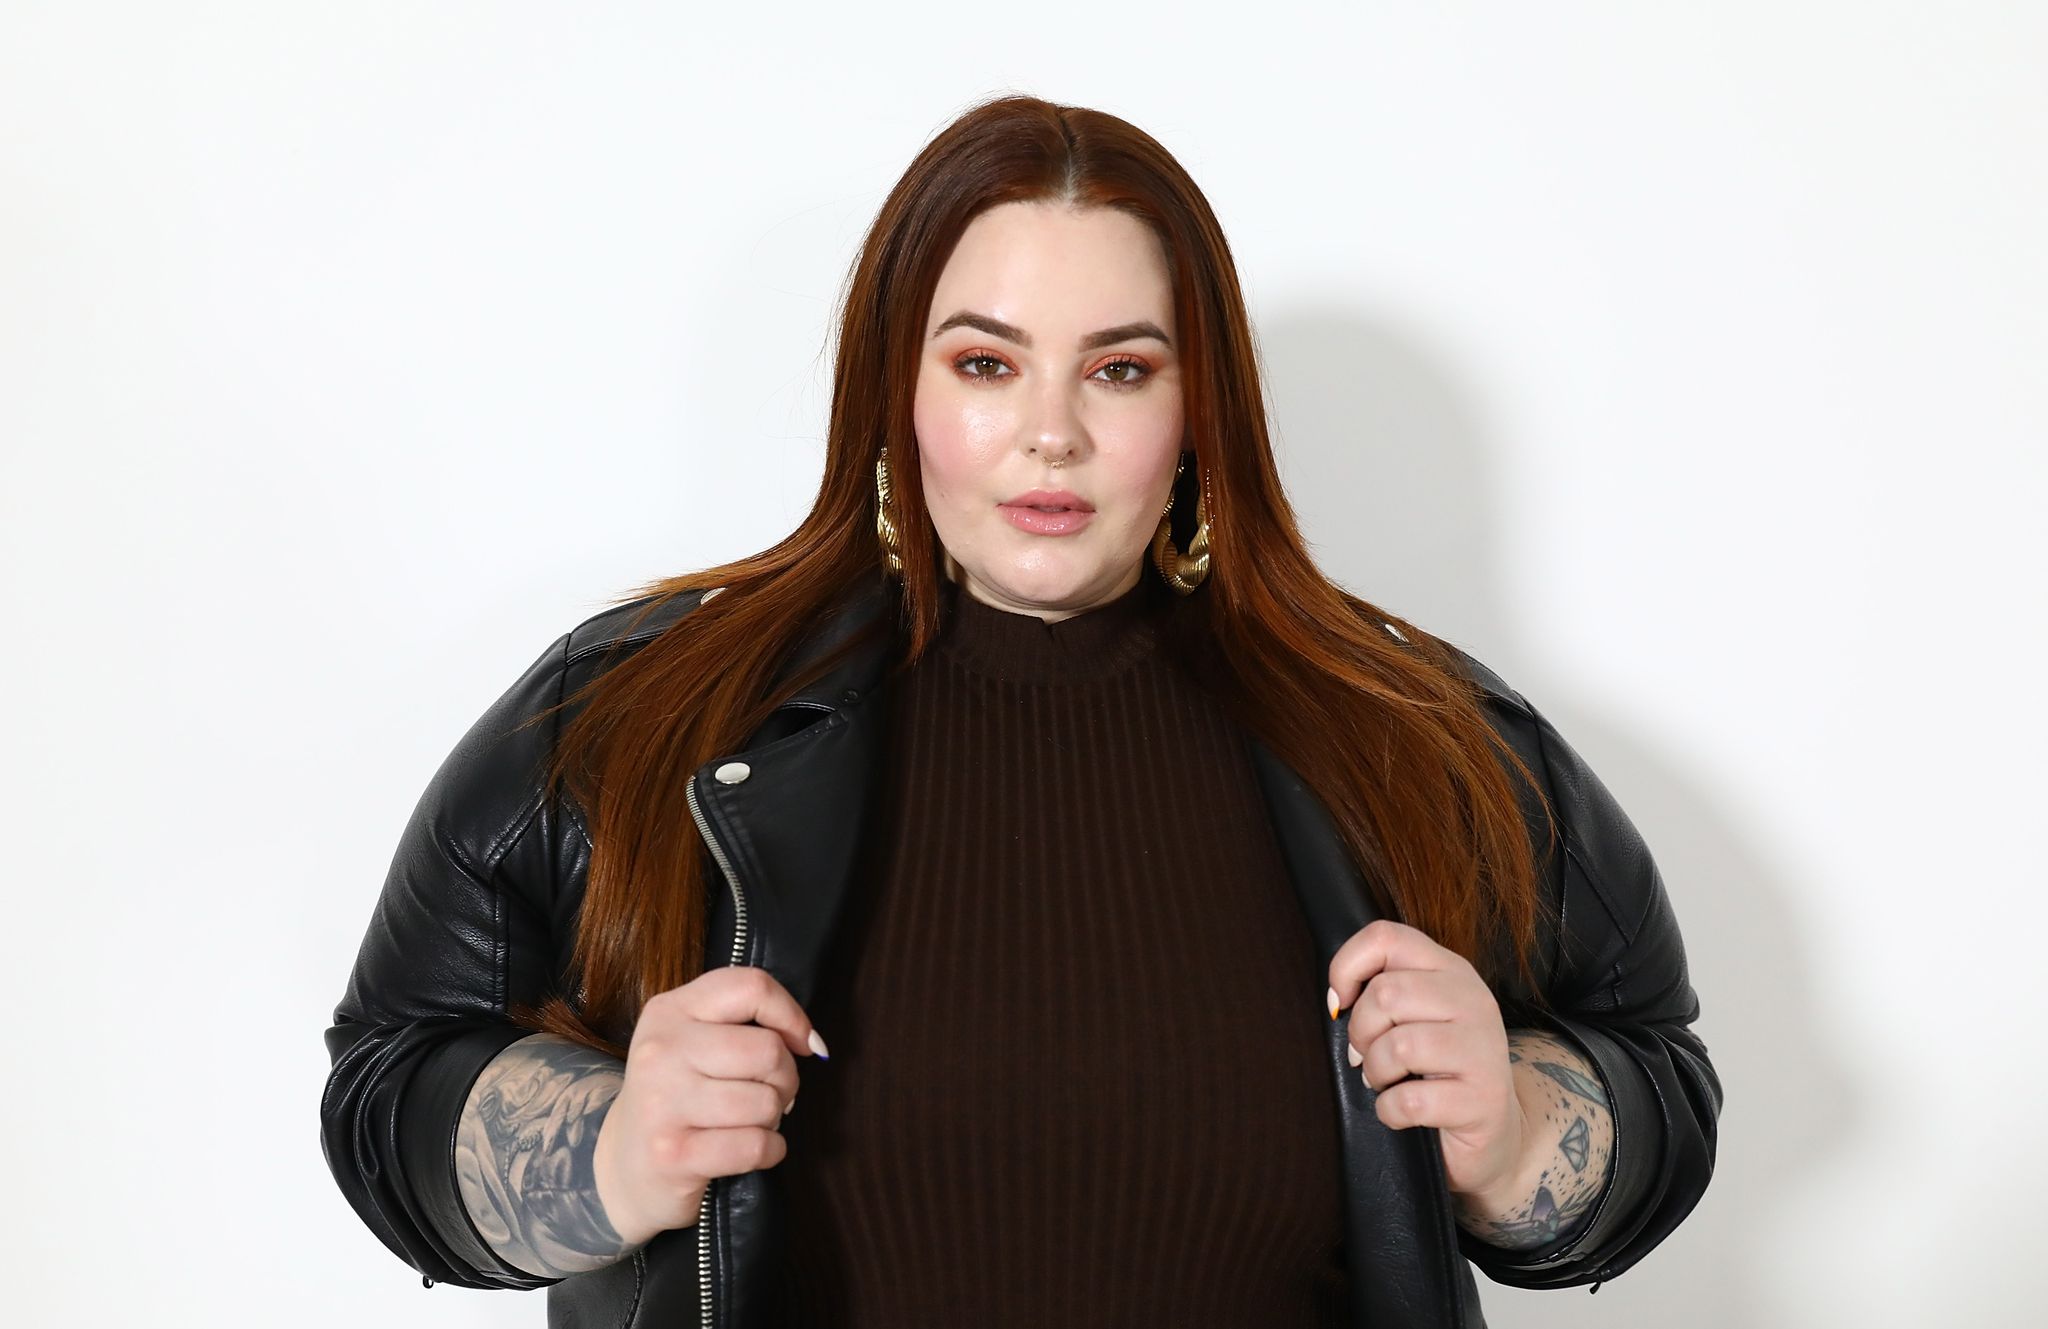 Tess Holliday Xxxvideo - Tess Holliday On Body Positivity, Plus-Size Models And Fashion Week